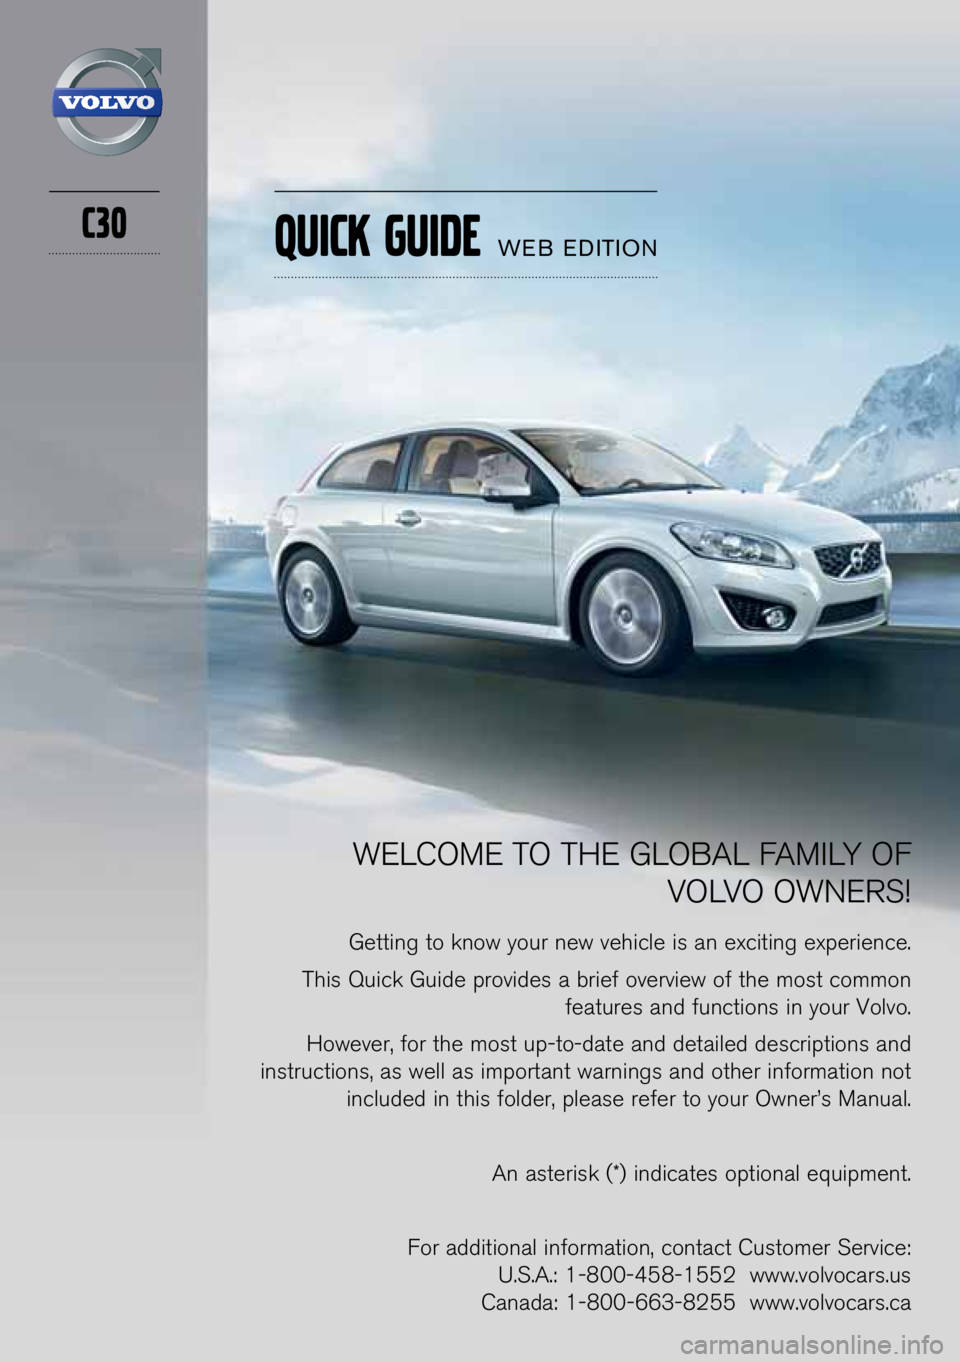 VOLVO C30 2013  Quick Guide C30
WELCOME TO THE GLOBAL FAMILY OF VOLVO OWNERS\f
Getti\bg to k\bow your \bew vehicle is a\b exciti\bg experie\bce.
This Quick Guide provides a brief overview of the most commo\b  features a\bd fu\bc